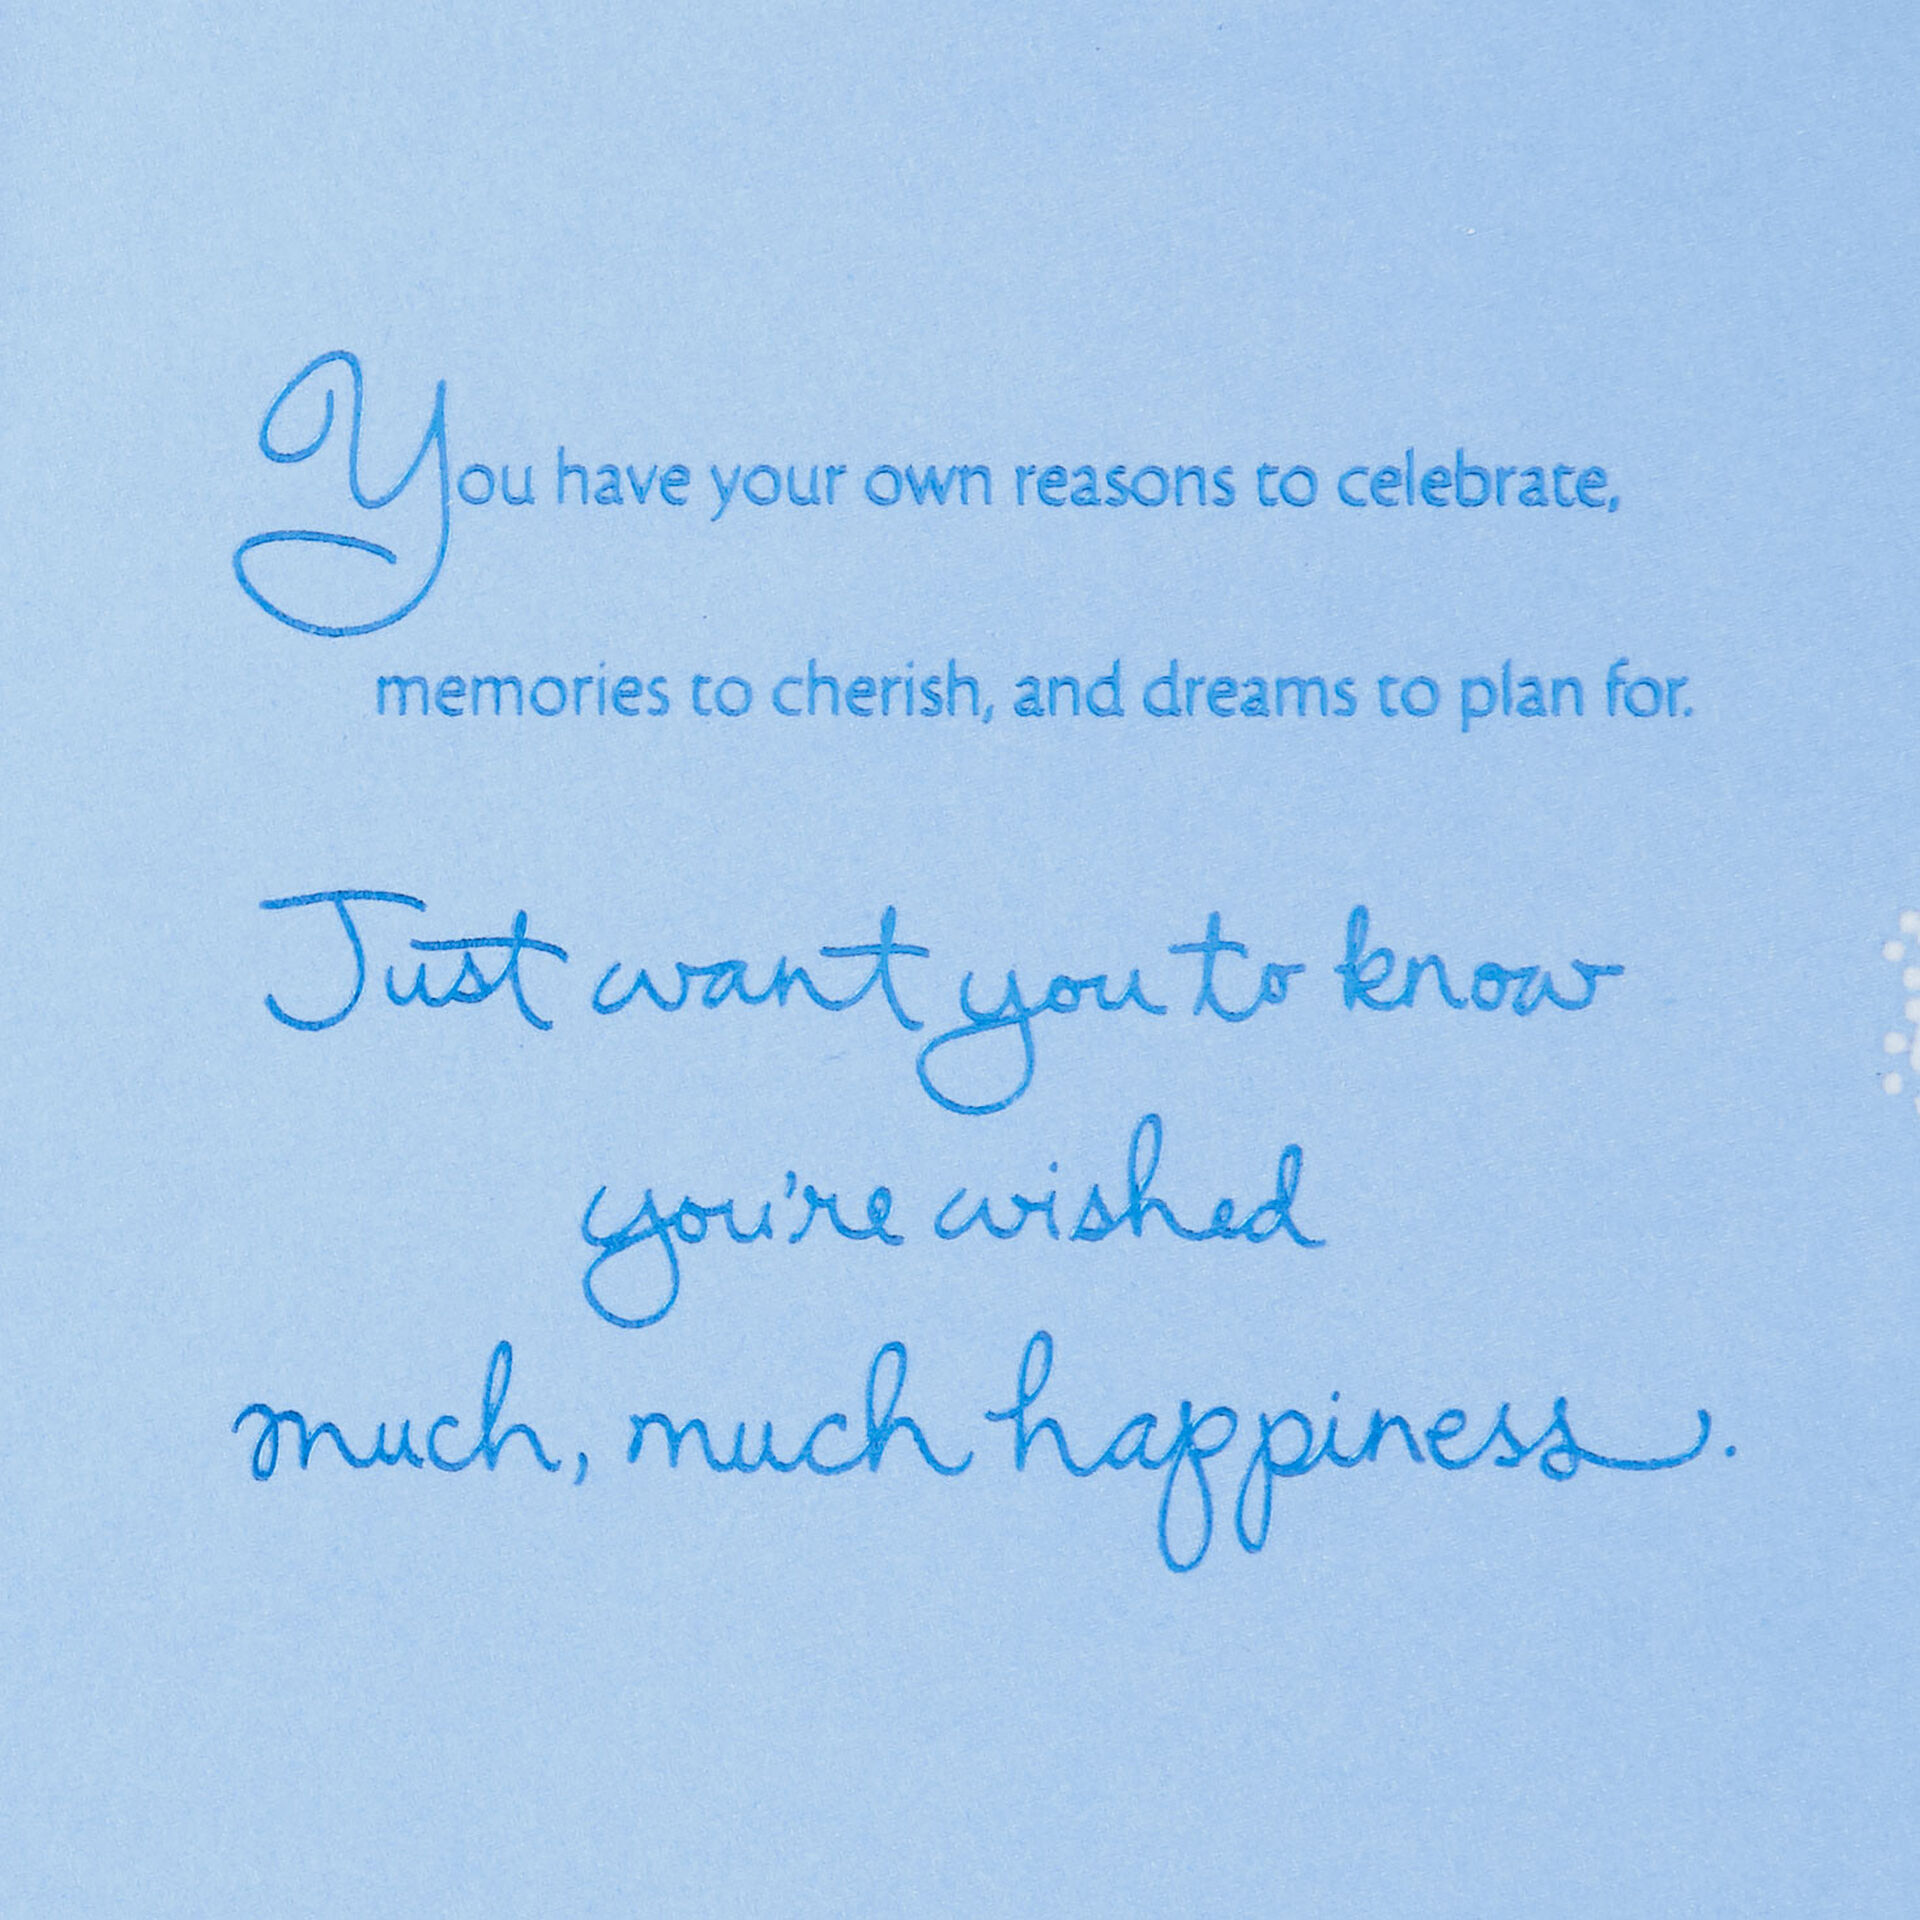 Dreams-to-Plan-For-Anniversary-Card_499AVY2558_02